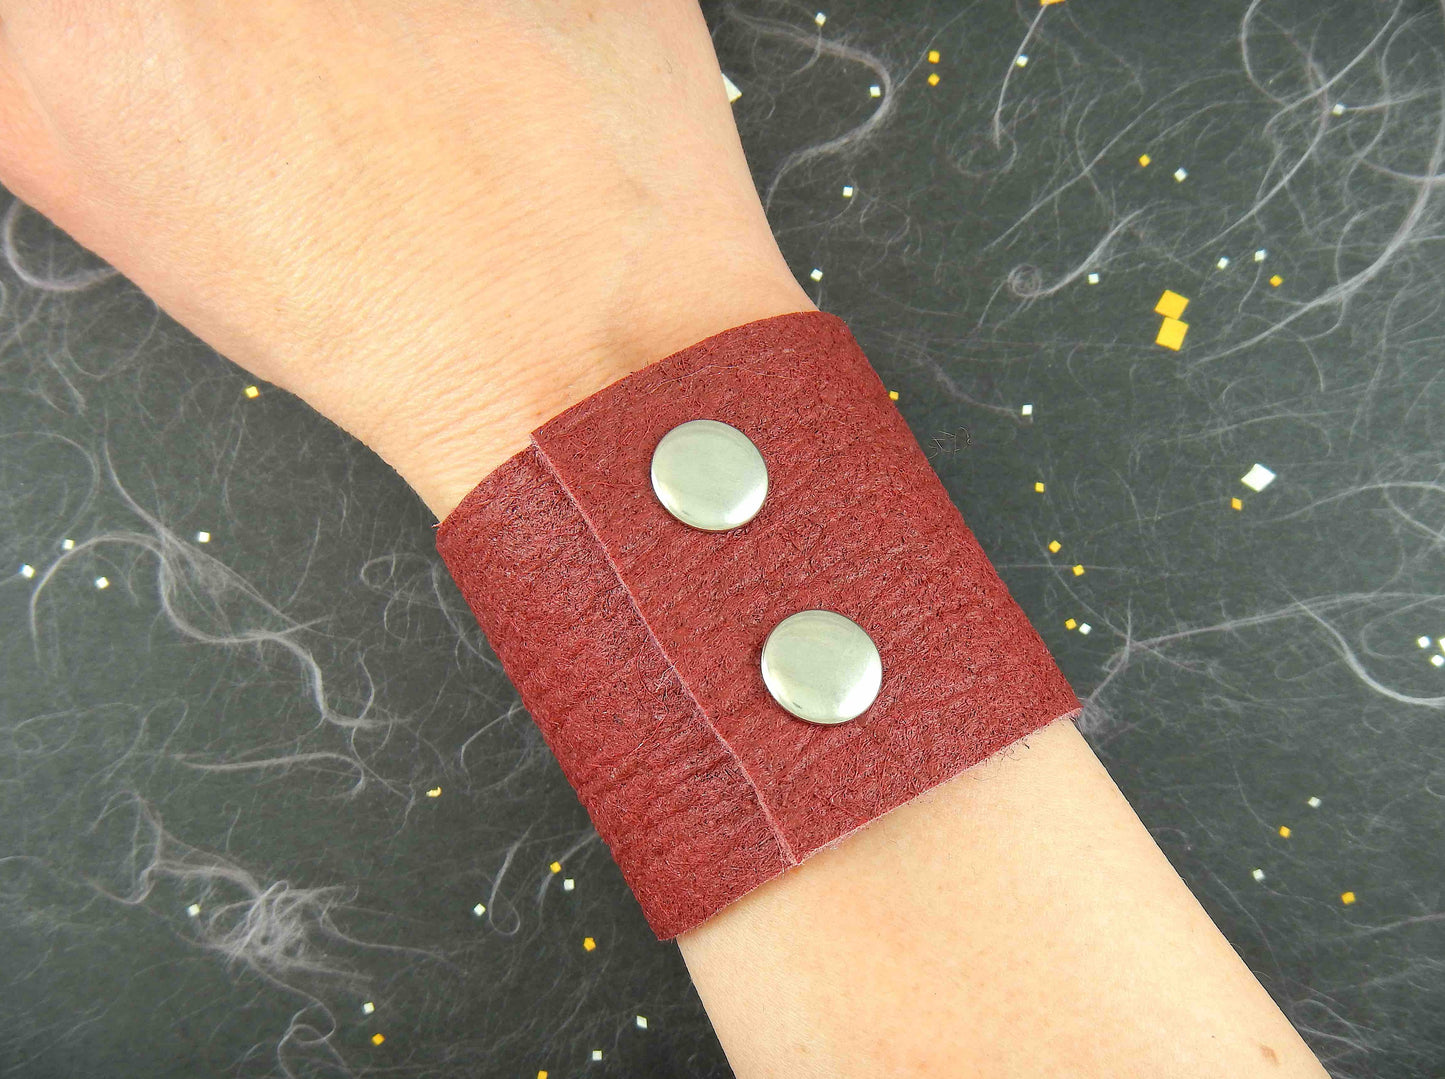 50mm Piñatex (vegan leather) cuff bracelet in 9 colours (black, gray, silver, white, blue, mulberry, brown, gold), stainless steel snap buttons